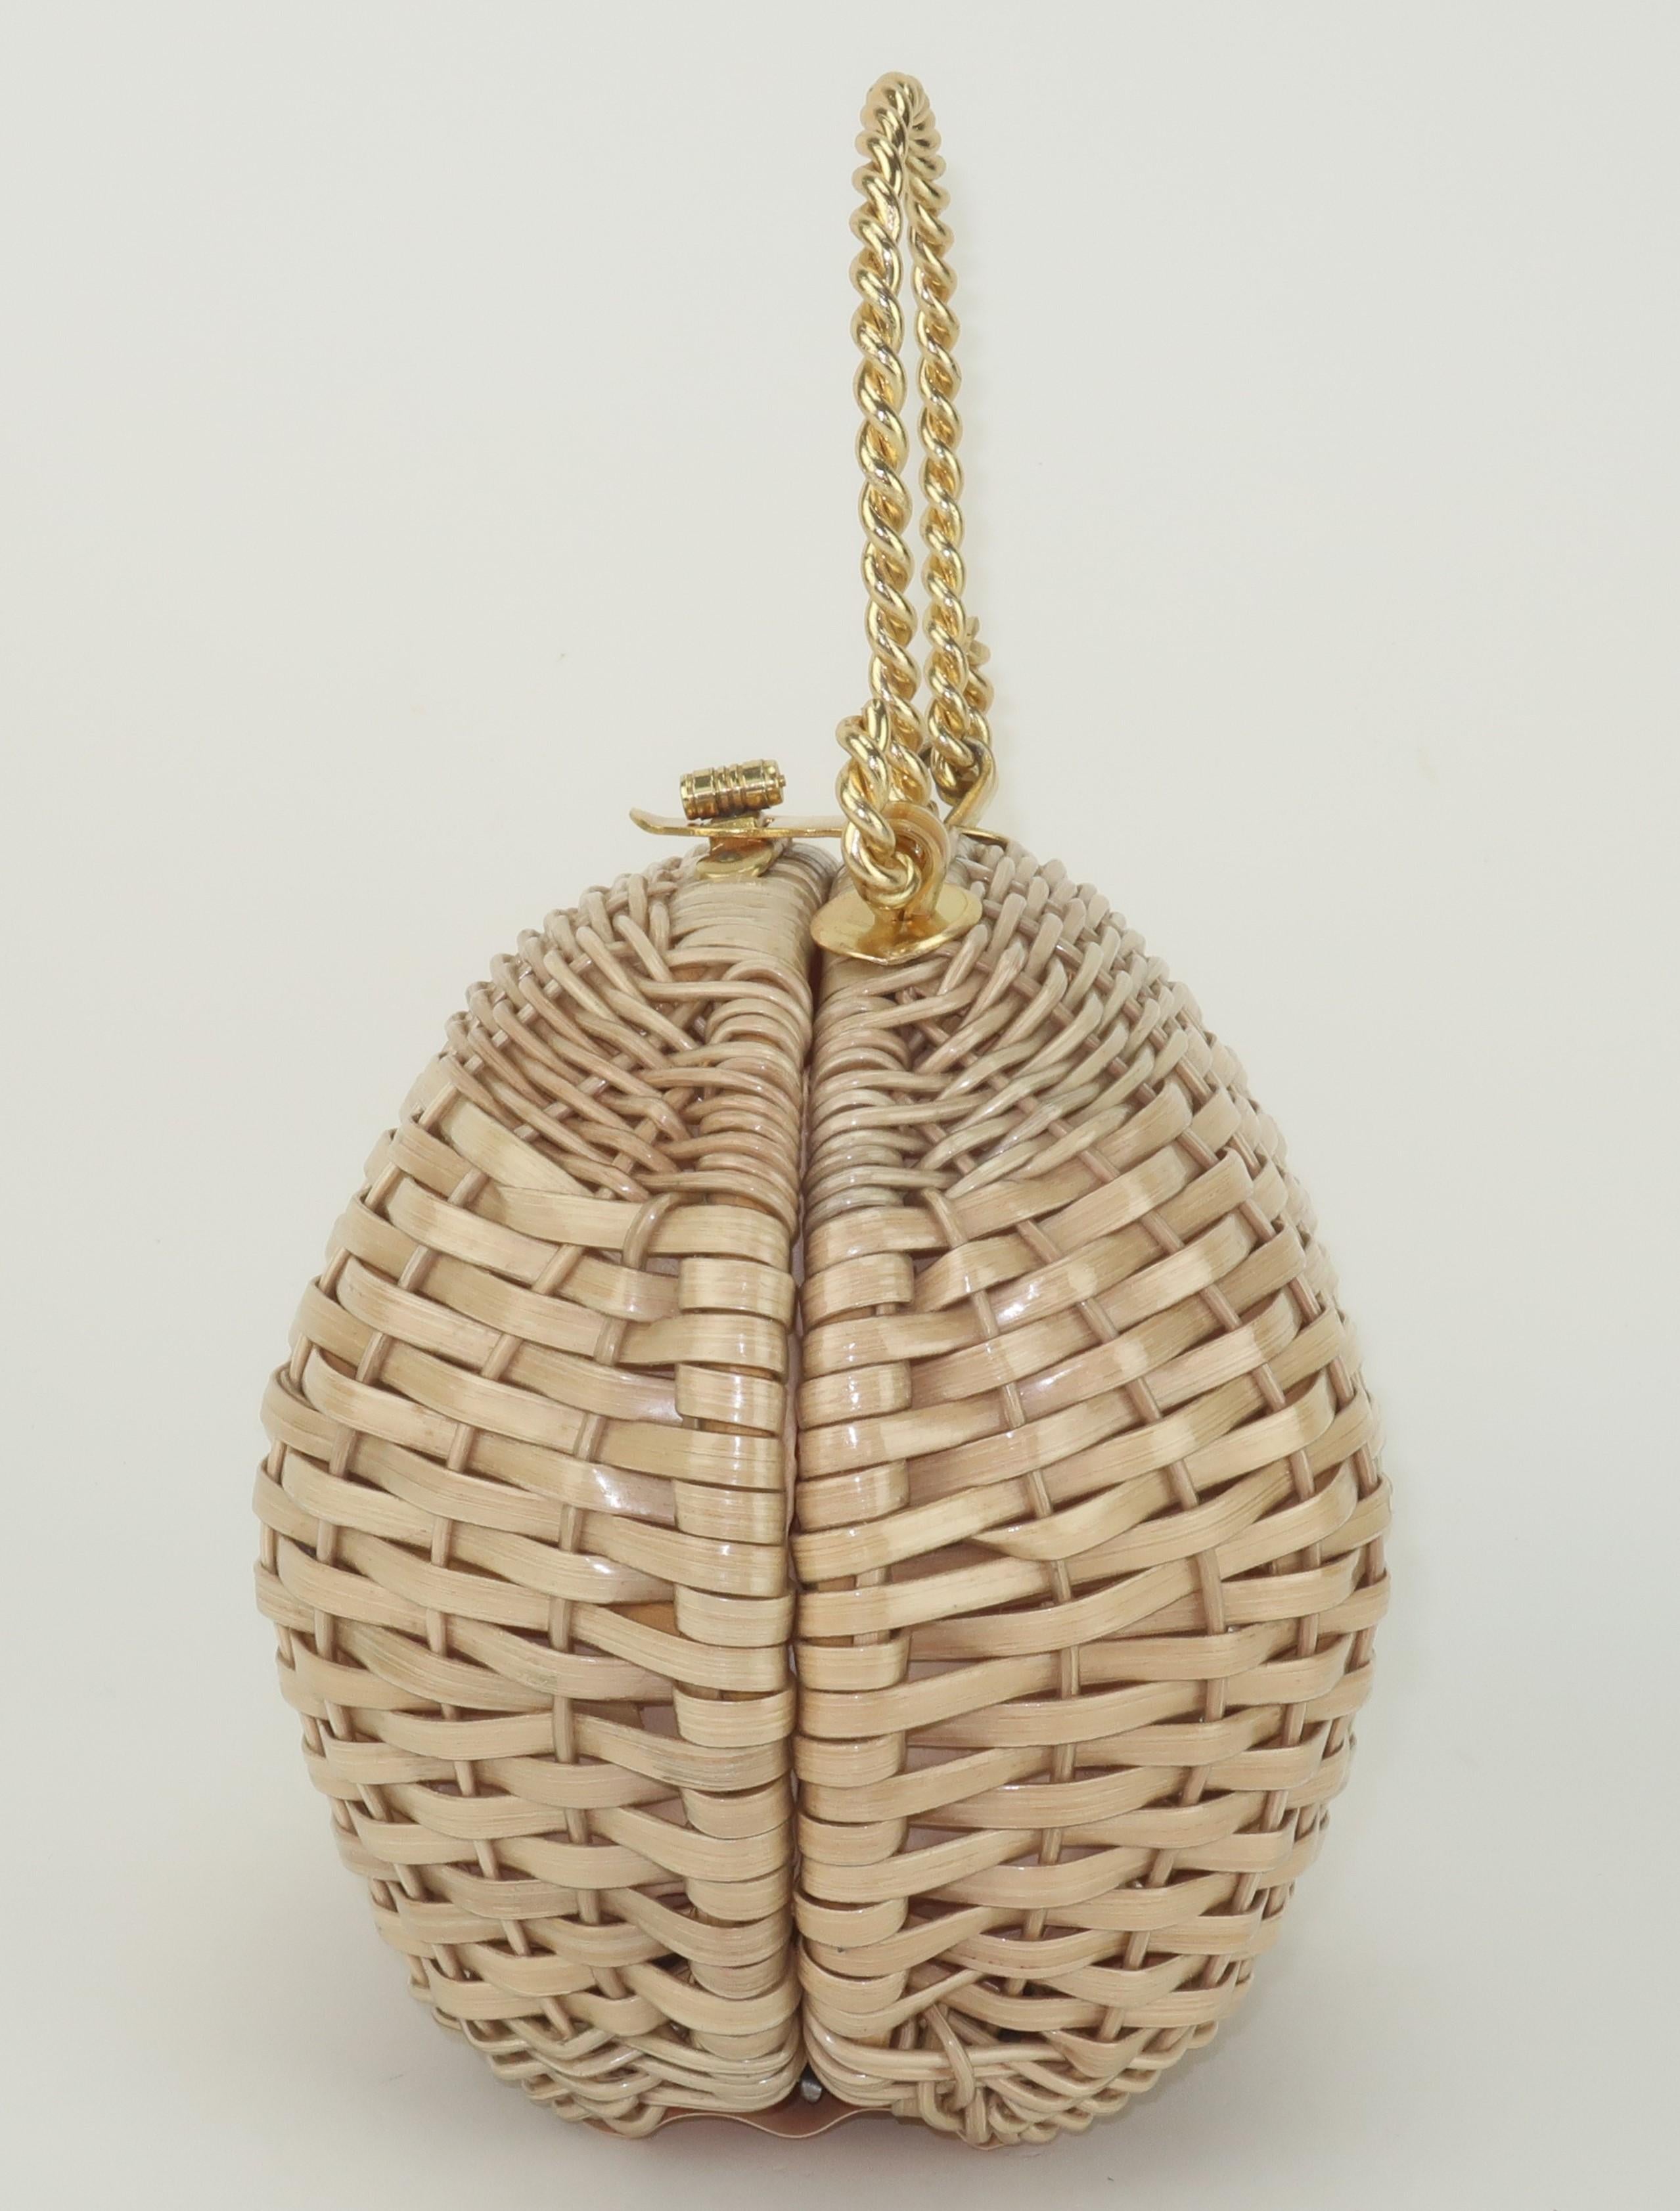 Wicker Ball Shaped Handbag With Gold Handle, 1960's In Good Condition For Sale In Atlanta, GA